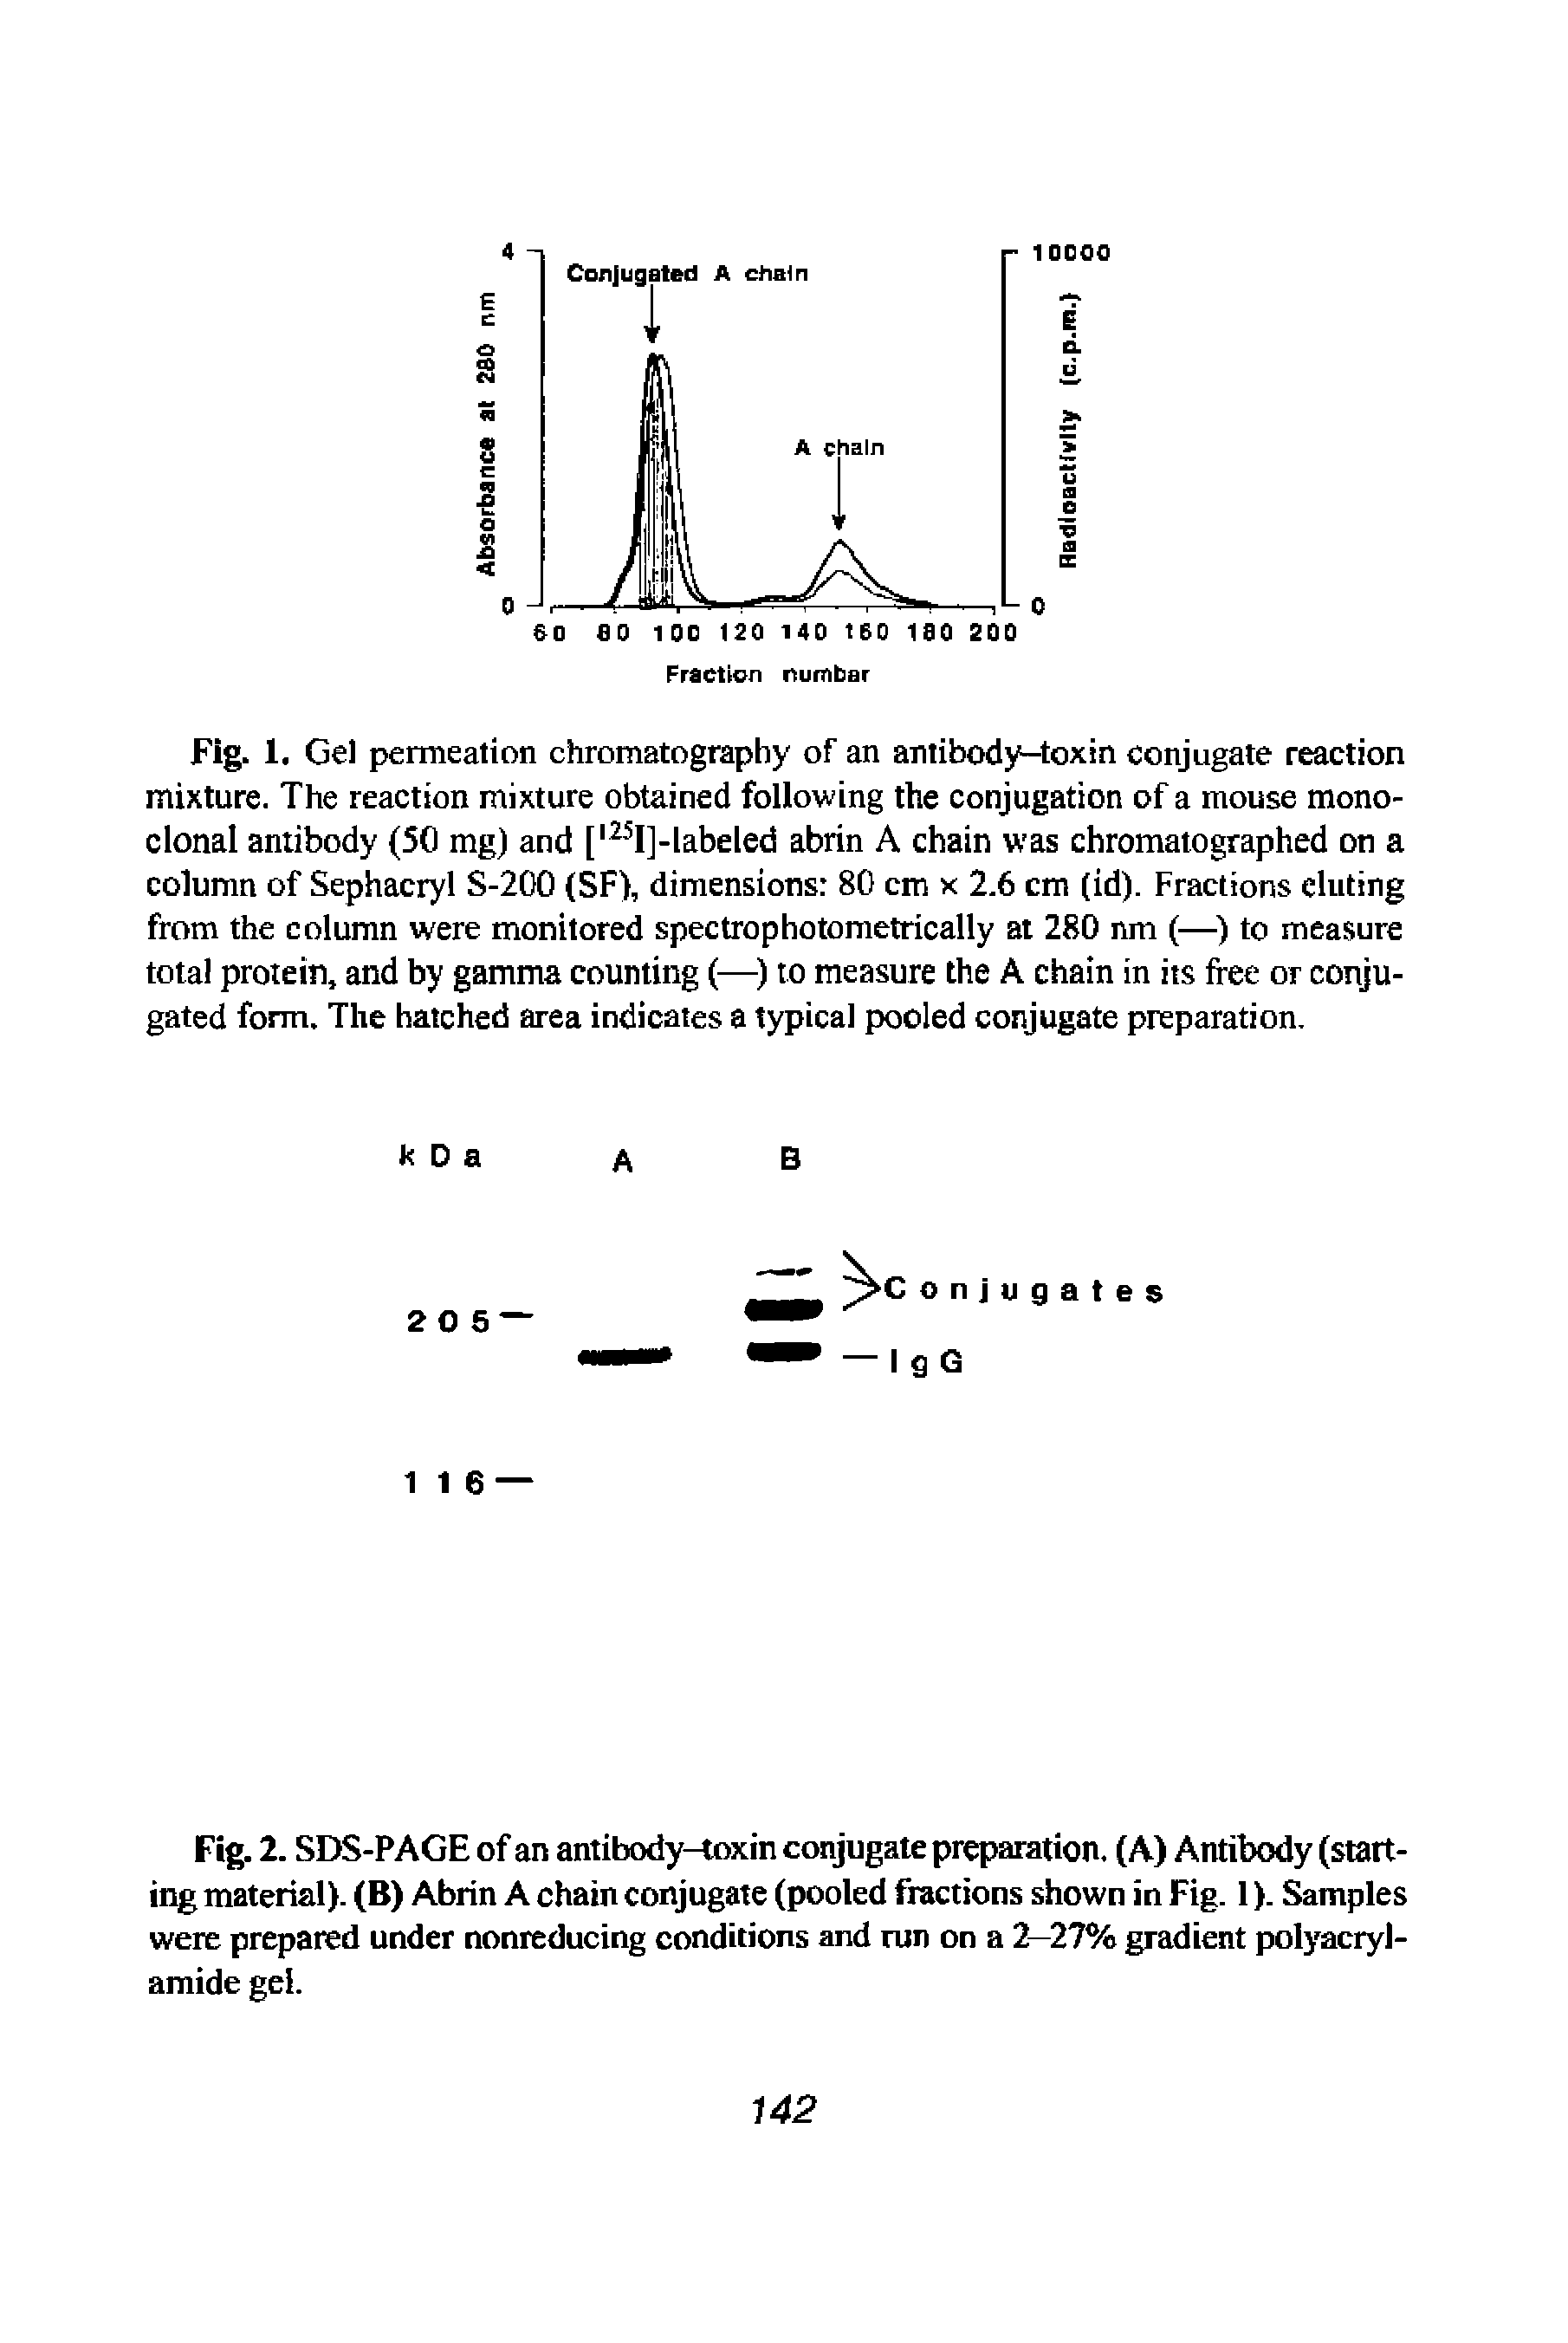 Fig. 1. Gel permeation chromatography of an antibody-toxin conjugate reaction mixture. The reaction mixture obtained following the conjugation of a mouse monoclonal antibody (50 mg) and [l25I]-labeled abrin A chain was chromatographed on a column of Sephacryl S-200 (SF), dimensions 80 cm x 2.6 cm (id). Fractions eluting from the column were monitored spectrophotometrically at 280 nm (—) to measure total protein, and by gamma counting (—) to measure the A chain in its free or conjugated form. The hatched area indicates a typical pooled conjugate preparation.